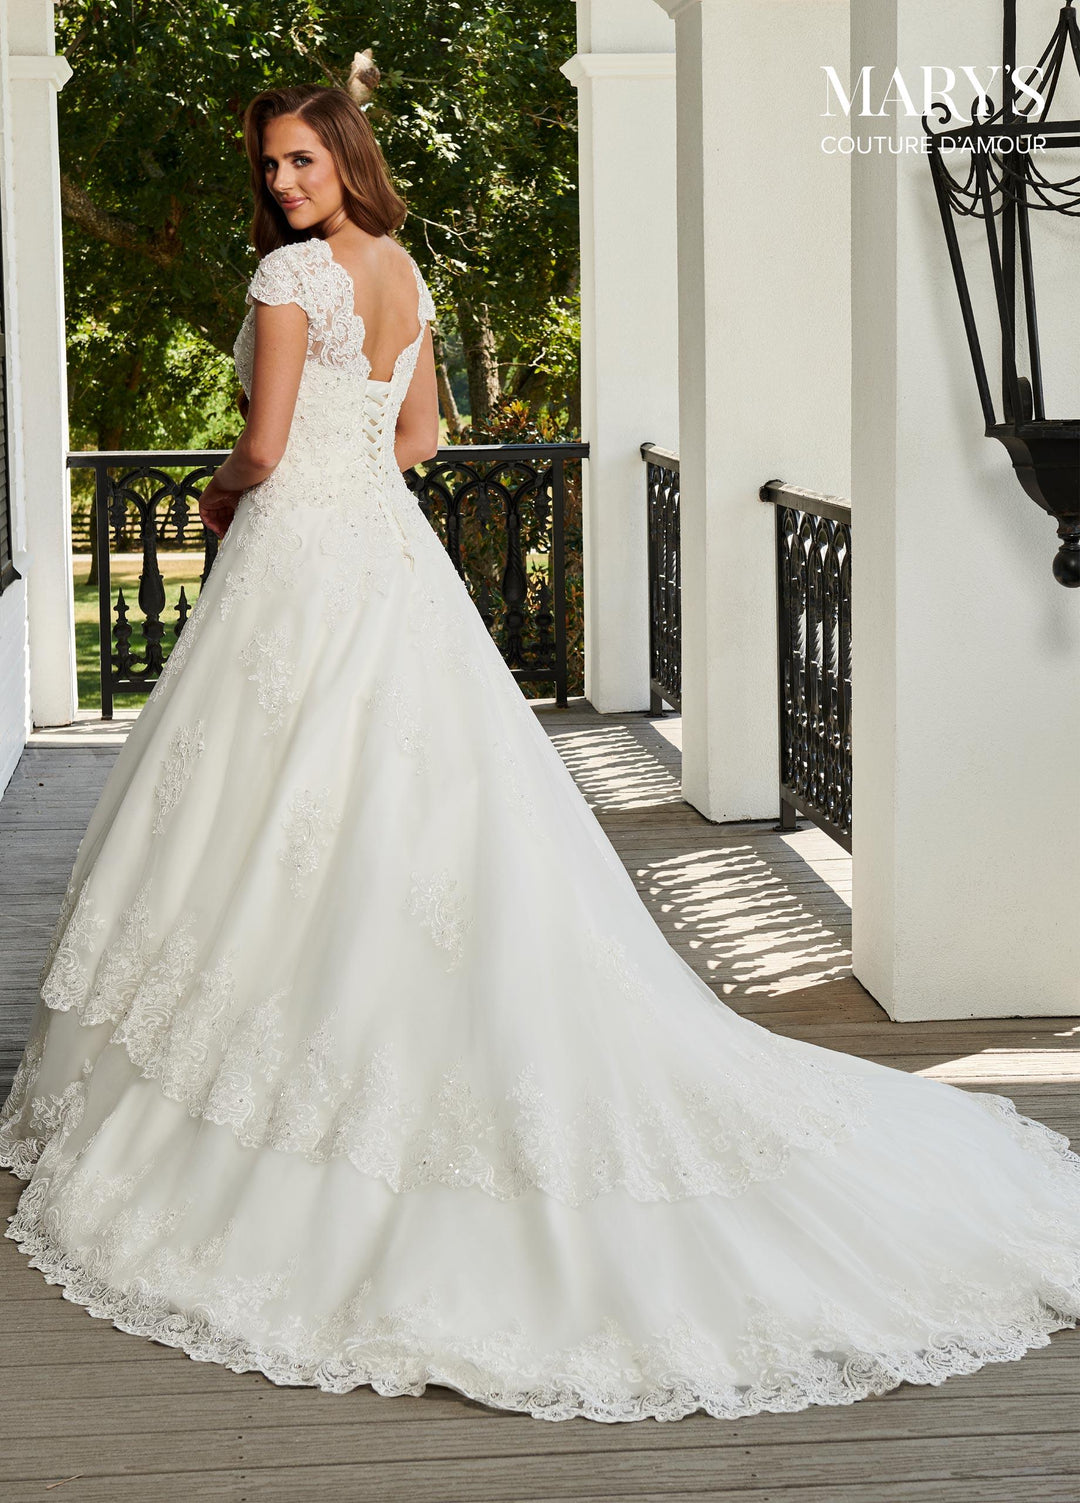 Cap Sleeve Lace Wedding Dress with Train by Mary's Bridal 6401